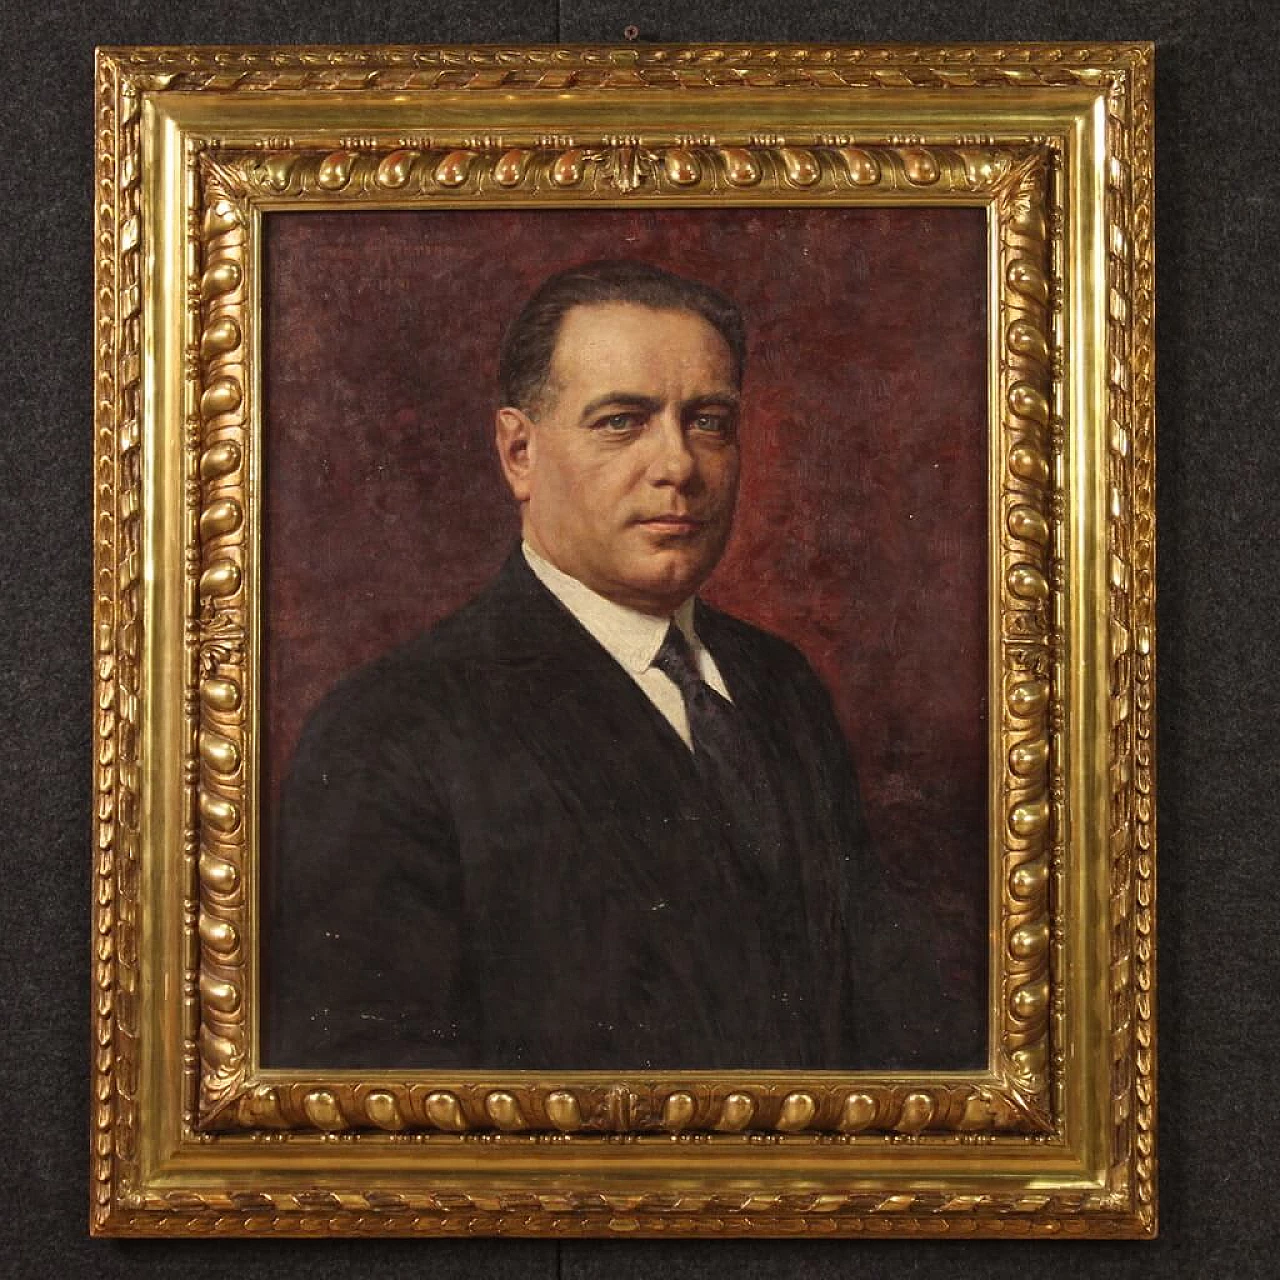 Angelo Garino, male portrait, oil painting on canvas, 1931 1